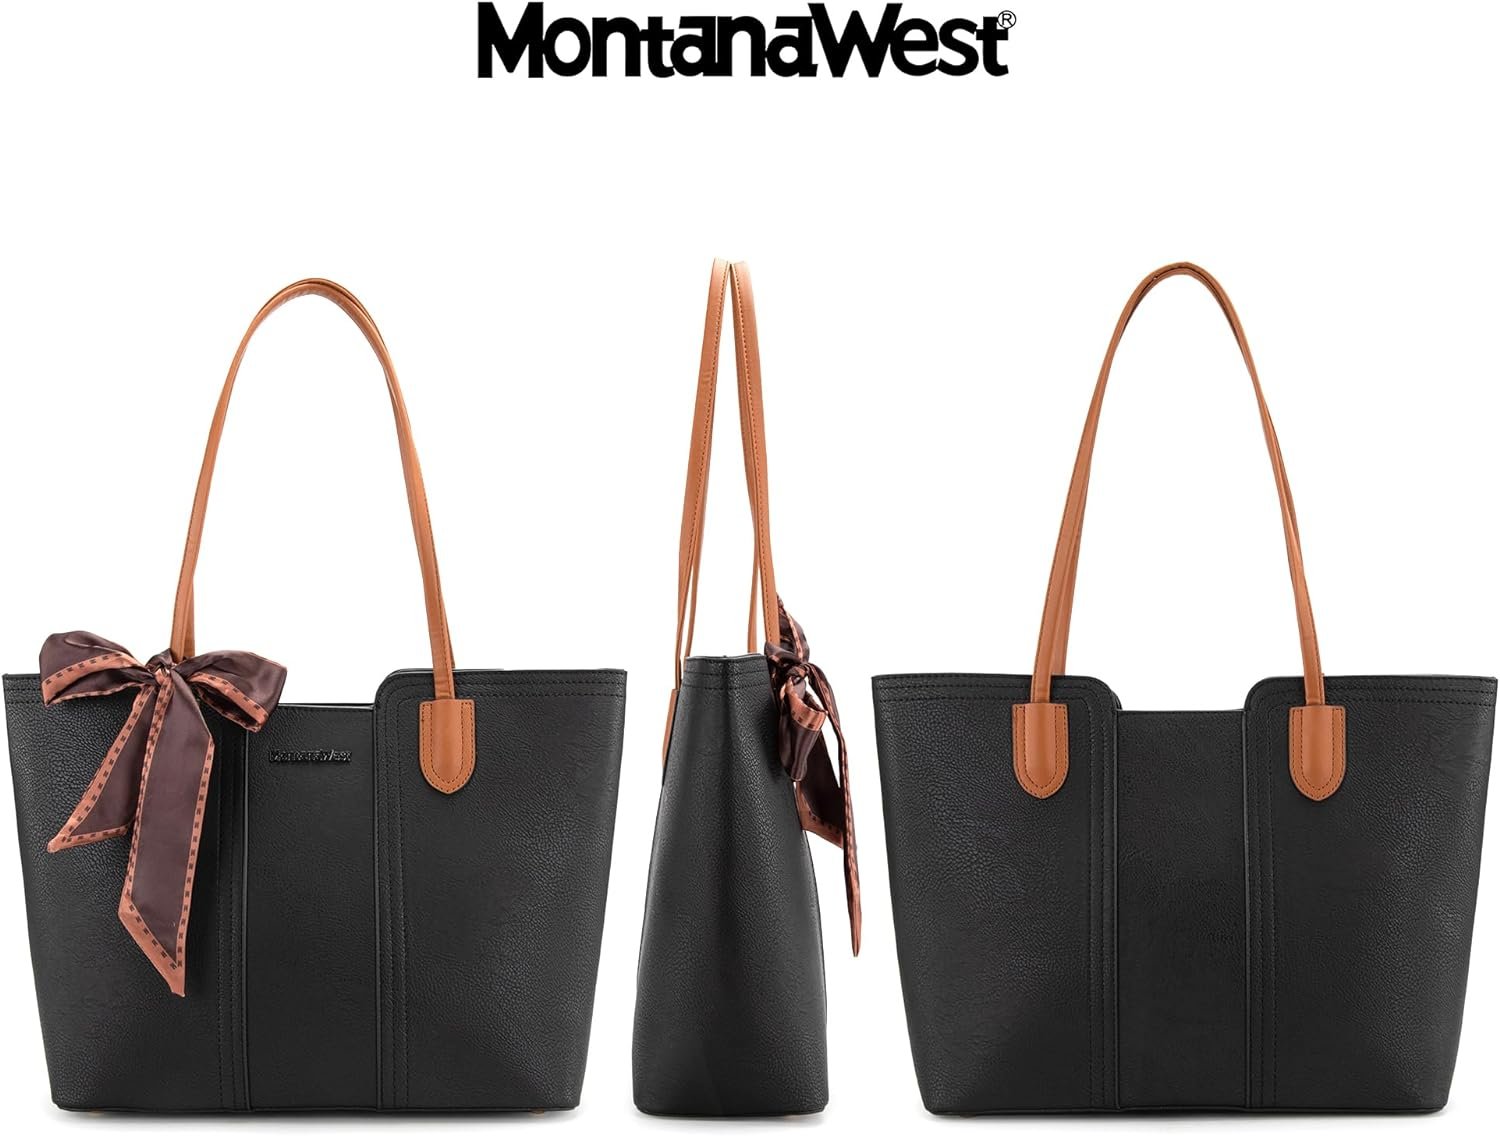 Montana West Tote Bags for Women Medium Top Handle Handbags with Scarf